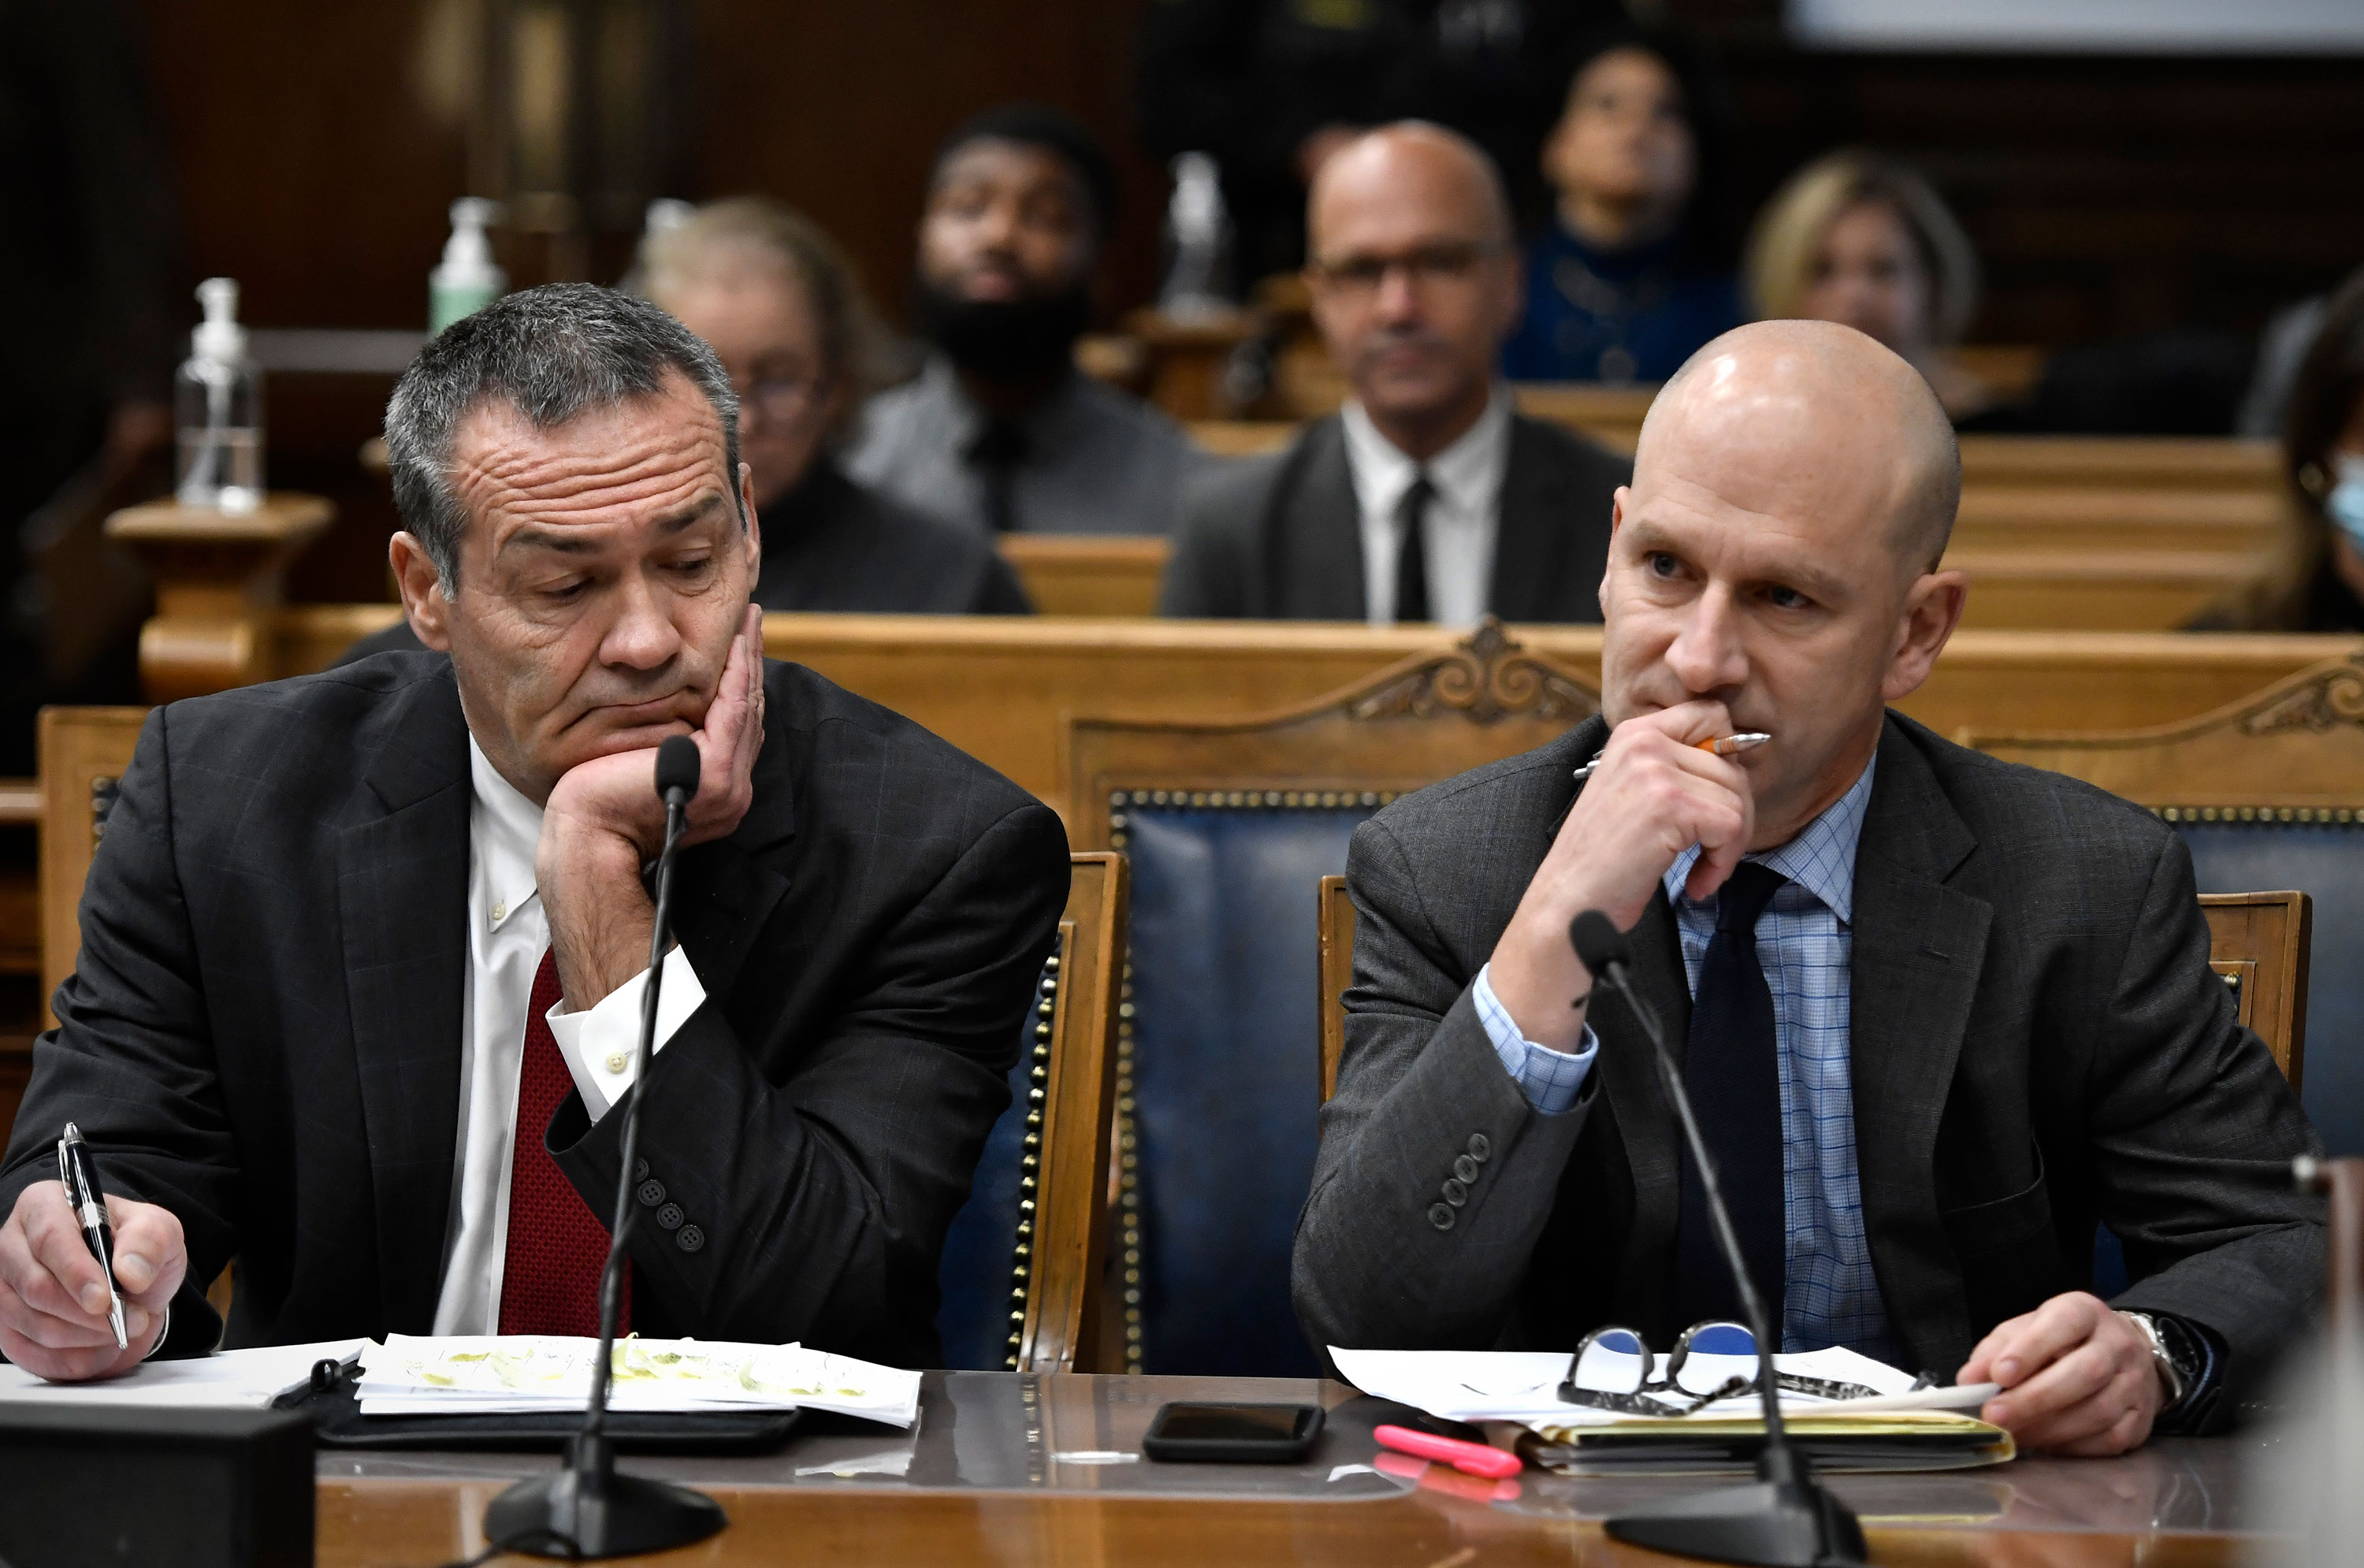 Kyle Rittenhouse's attorneys Mark Richards, left, and Corey Chirafisi listen during the trial in Kenosha, Wisconsin, on Tuesday.